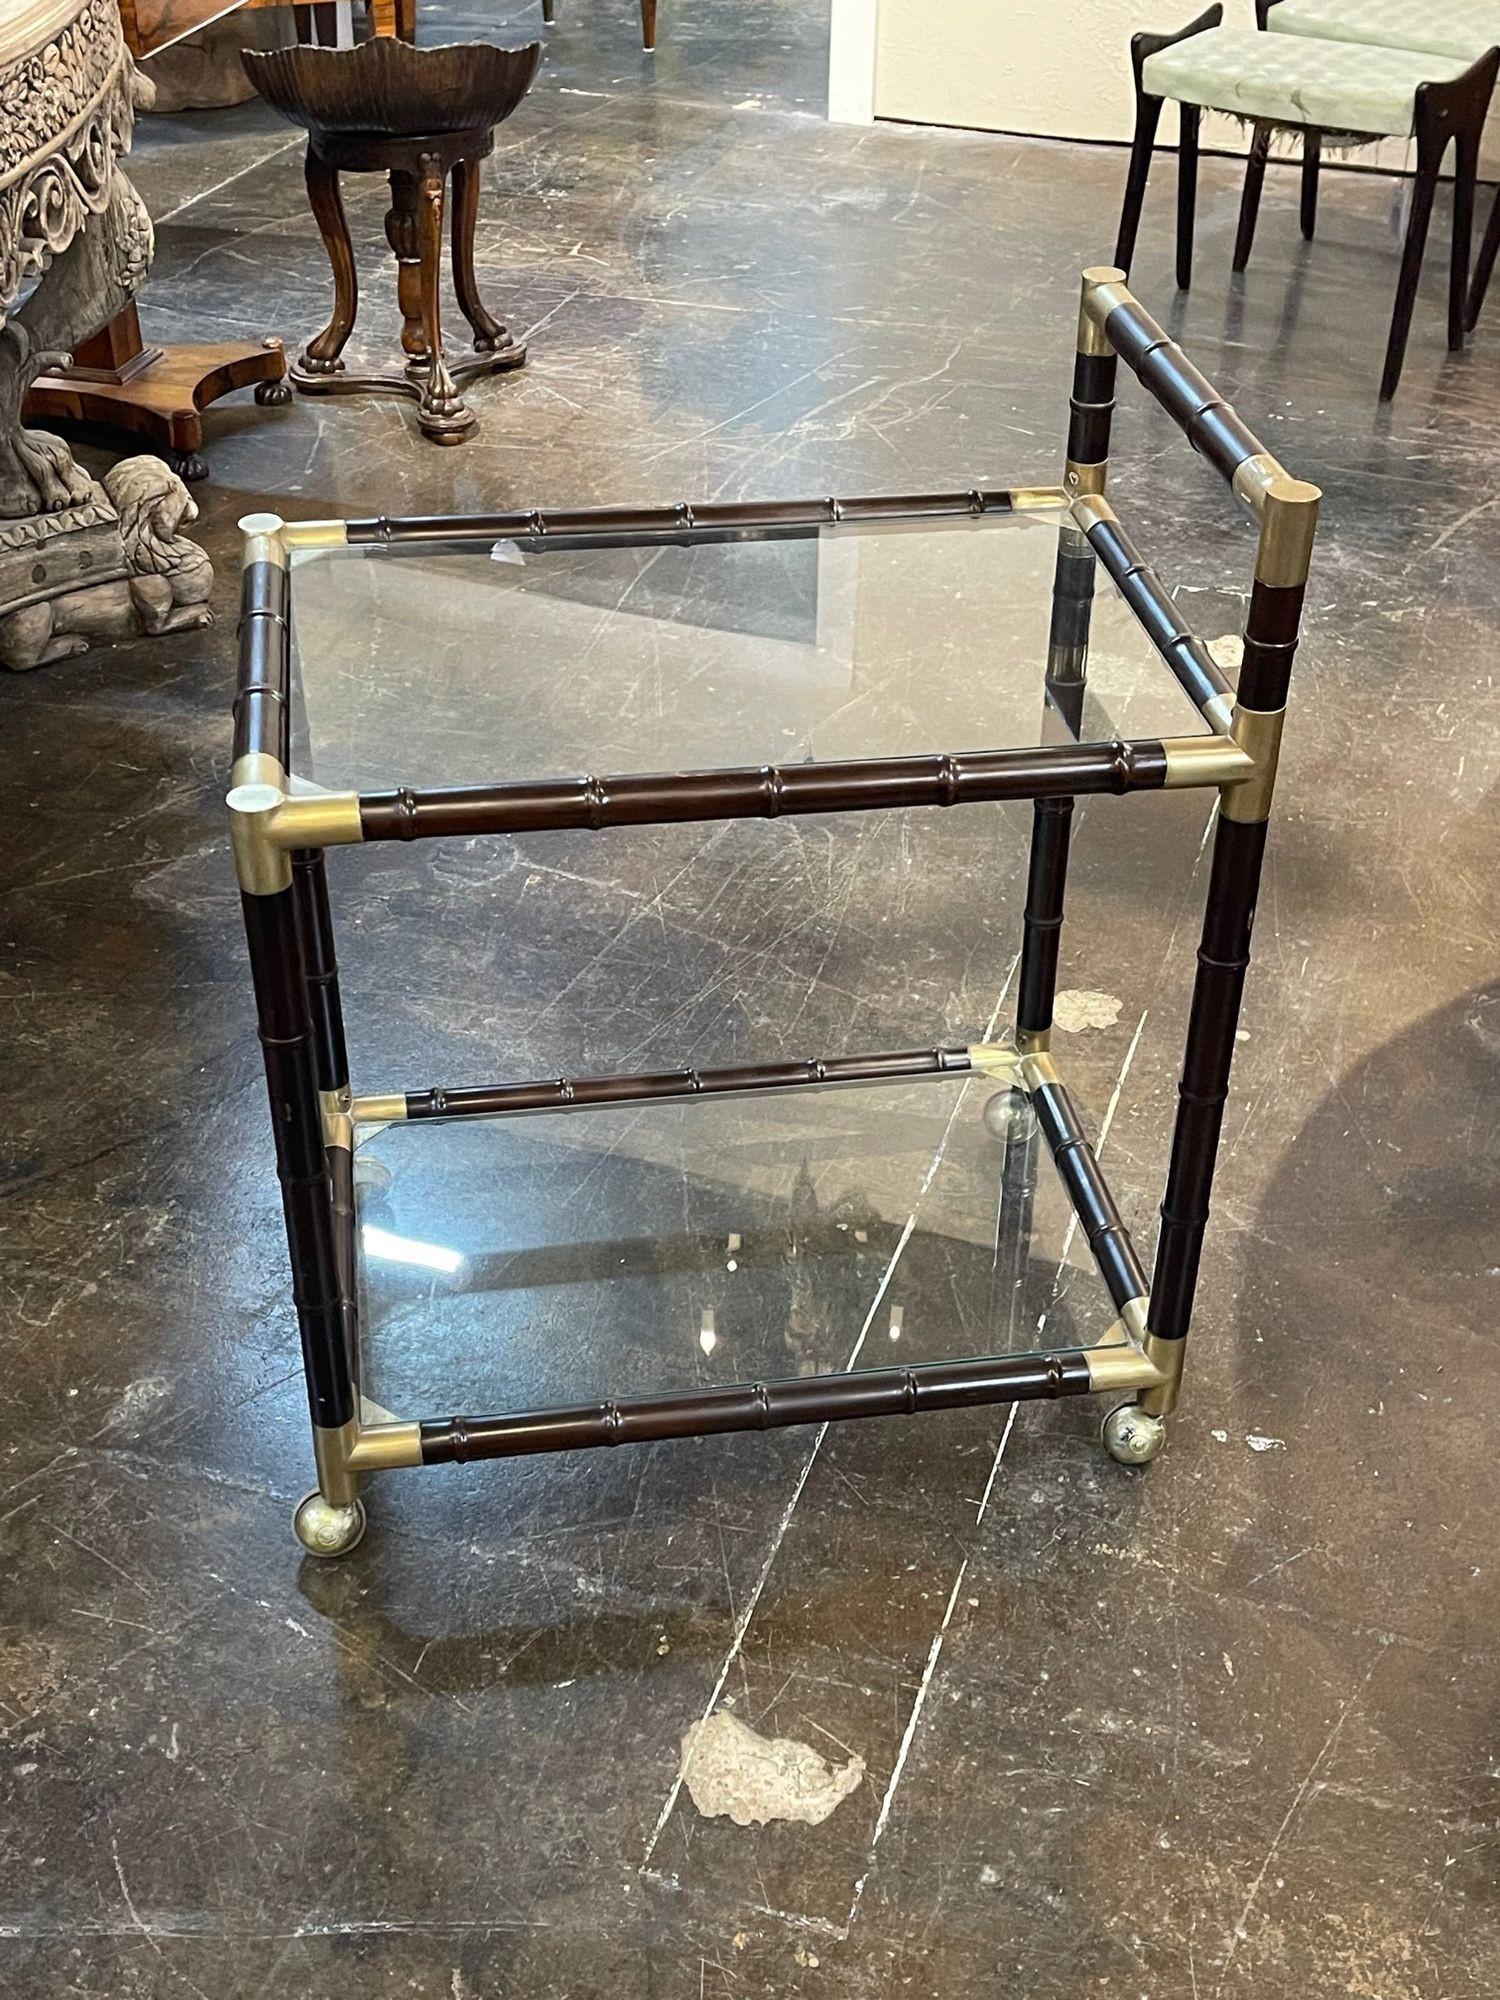 Very nice Italian Mid-Century Modern brass and bamboo form bar car. The piece has 2 glass shelves and is on casters. Decorative as well as useful!